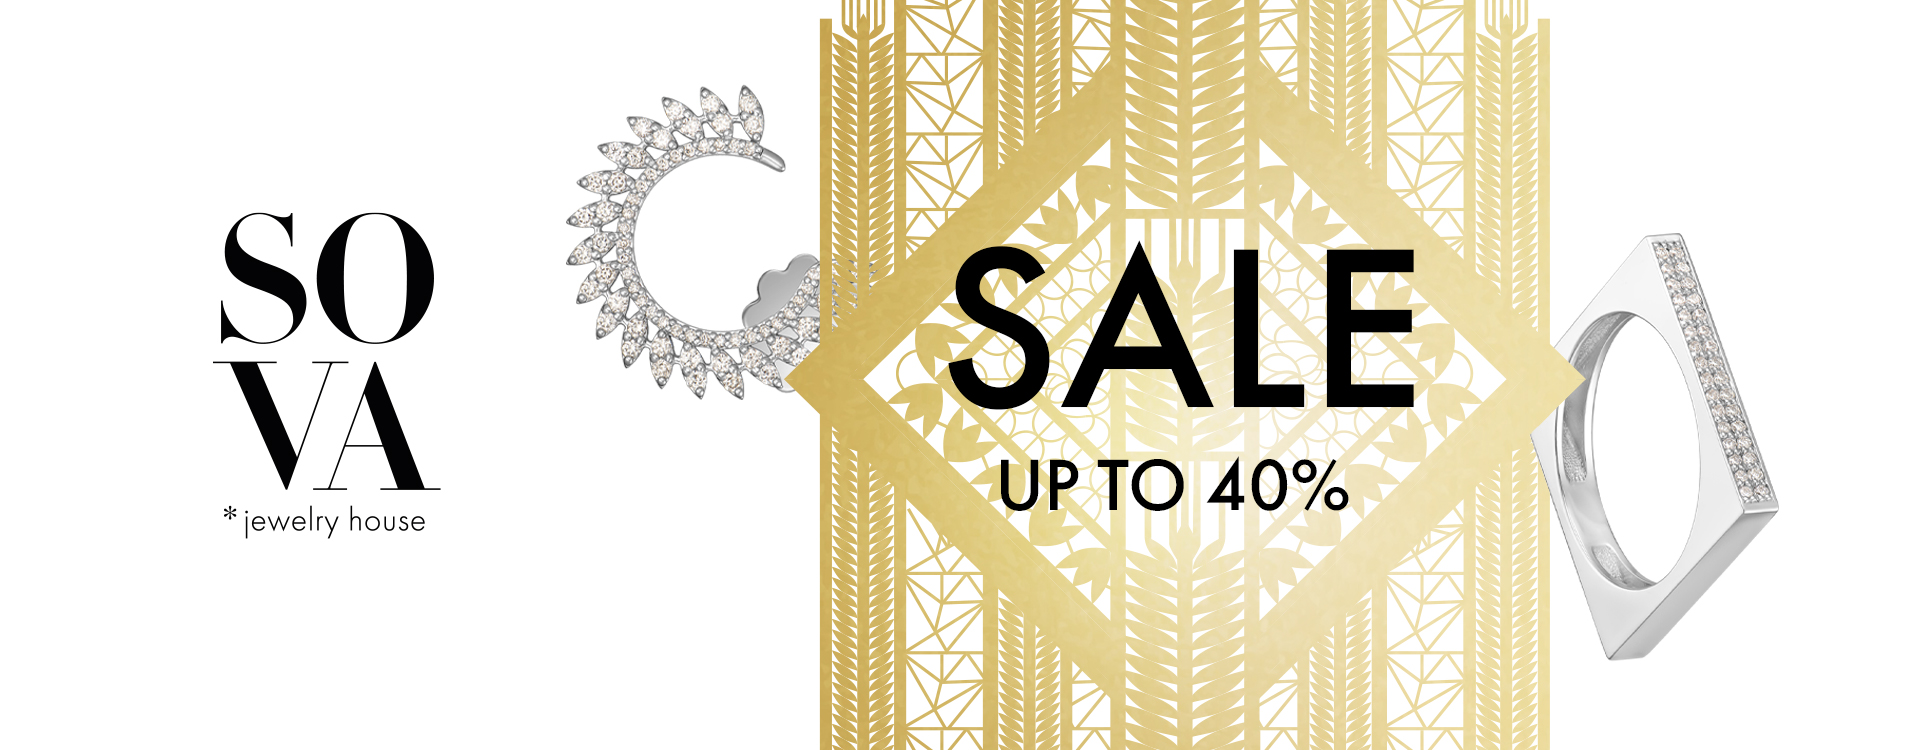 Sale and discounts up to 40% in SOVA